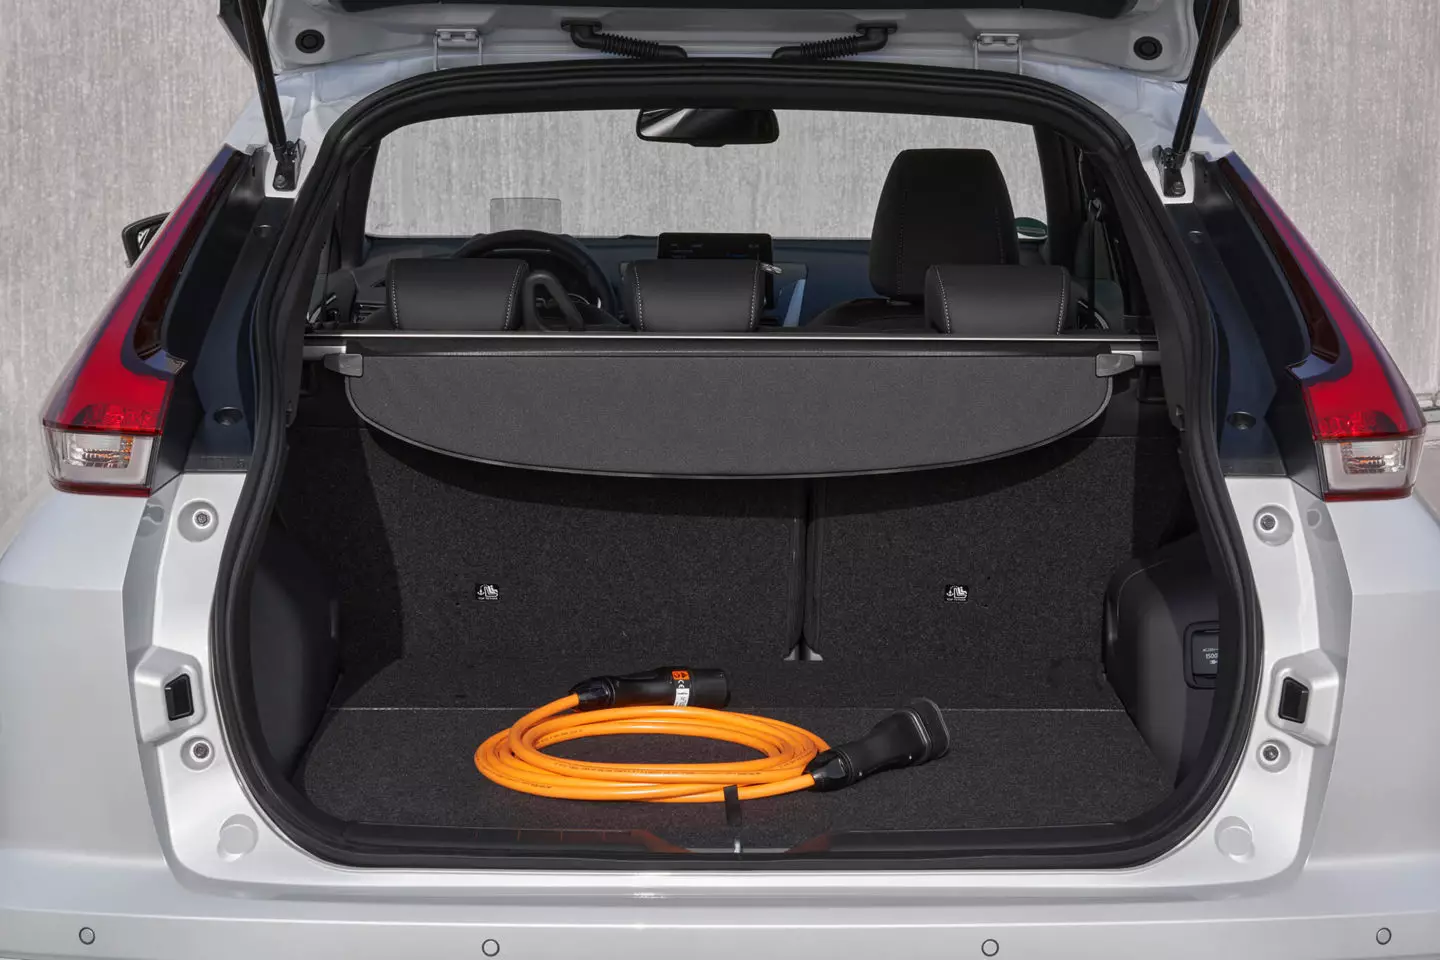 Luggage compartment with charging cable